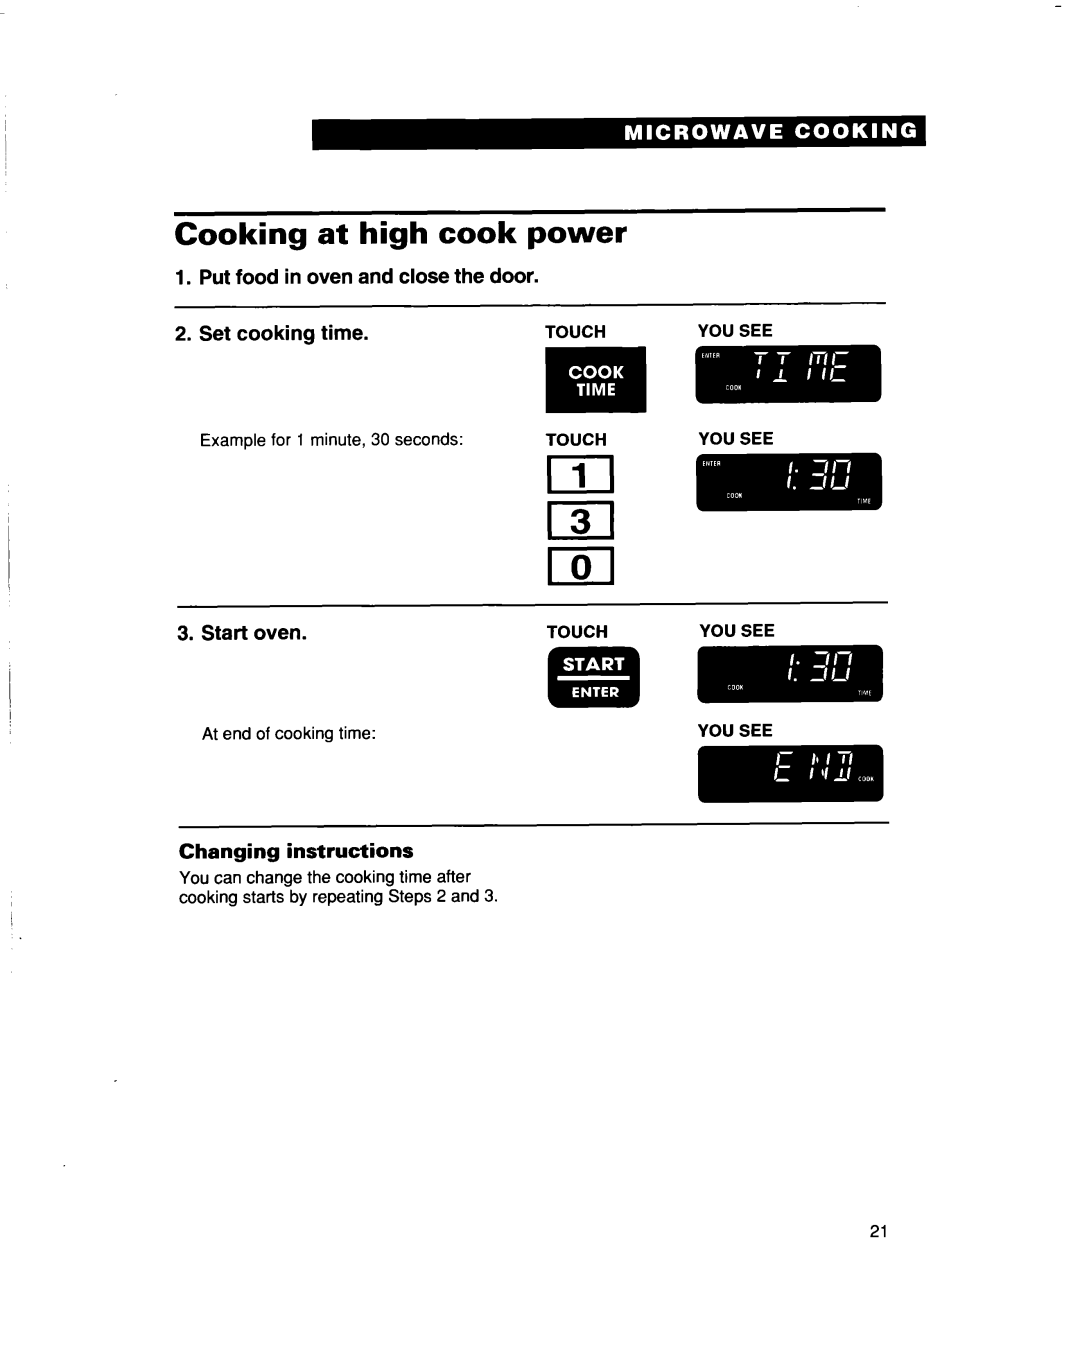 Whirlpool MH9115XB warranty Cooking at high cook power, Put food in oven and close the door, Set cooking time, Start oven 